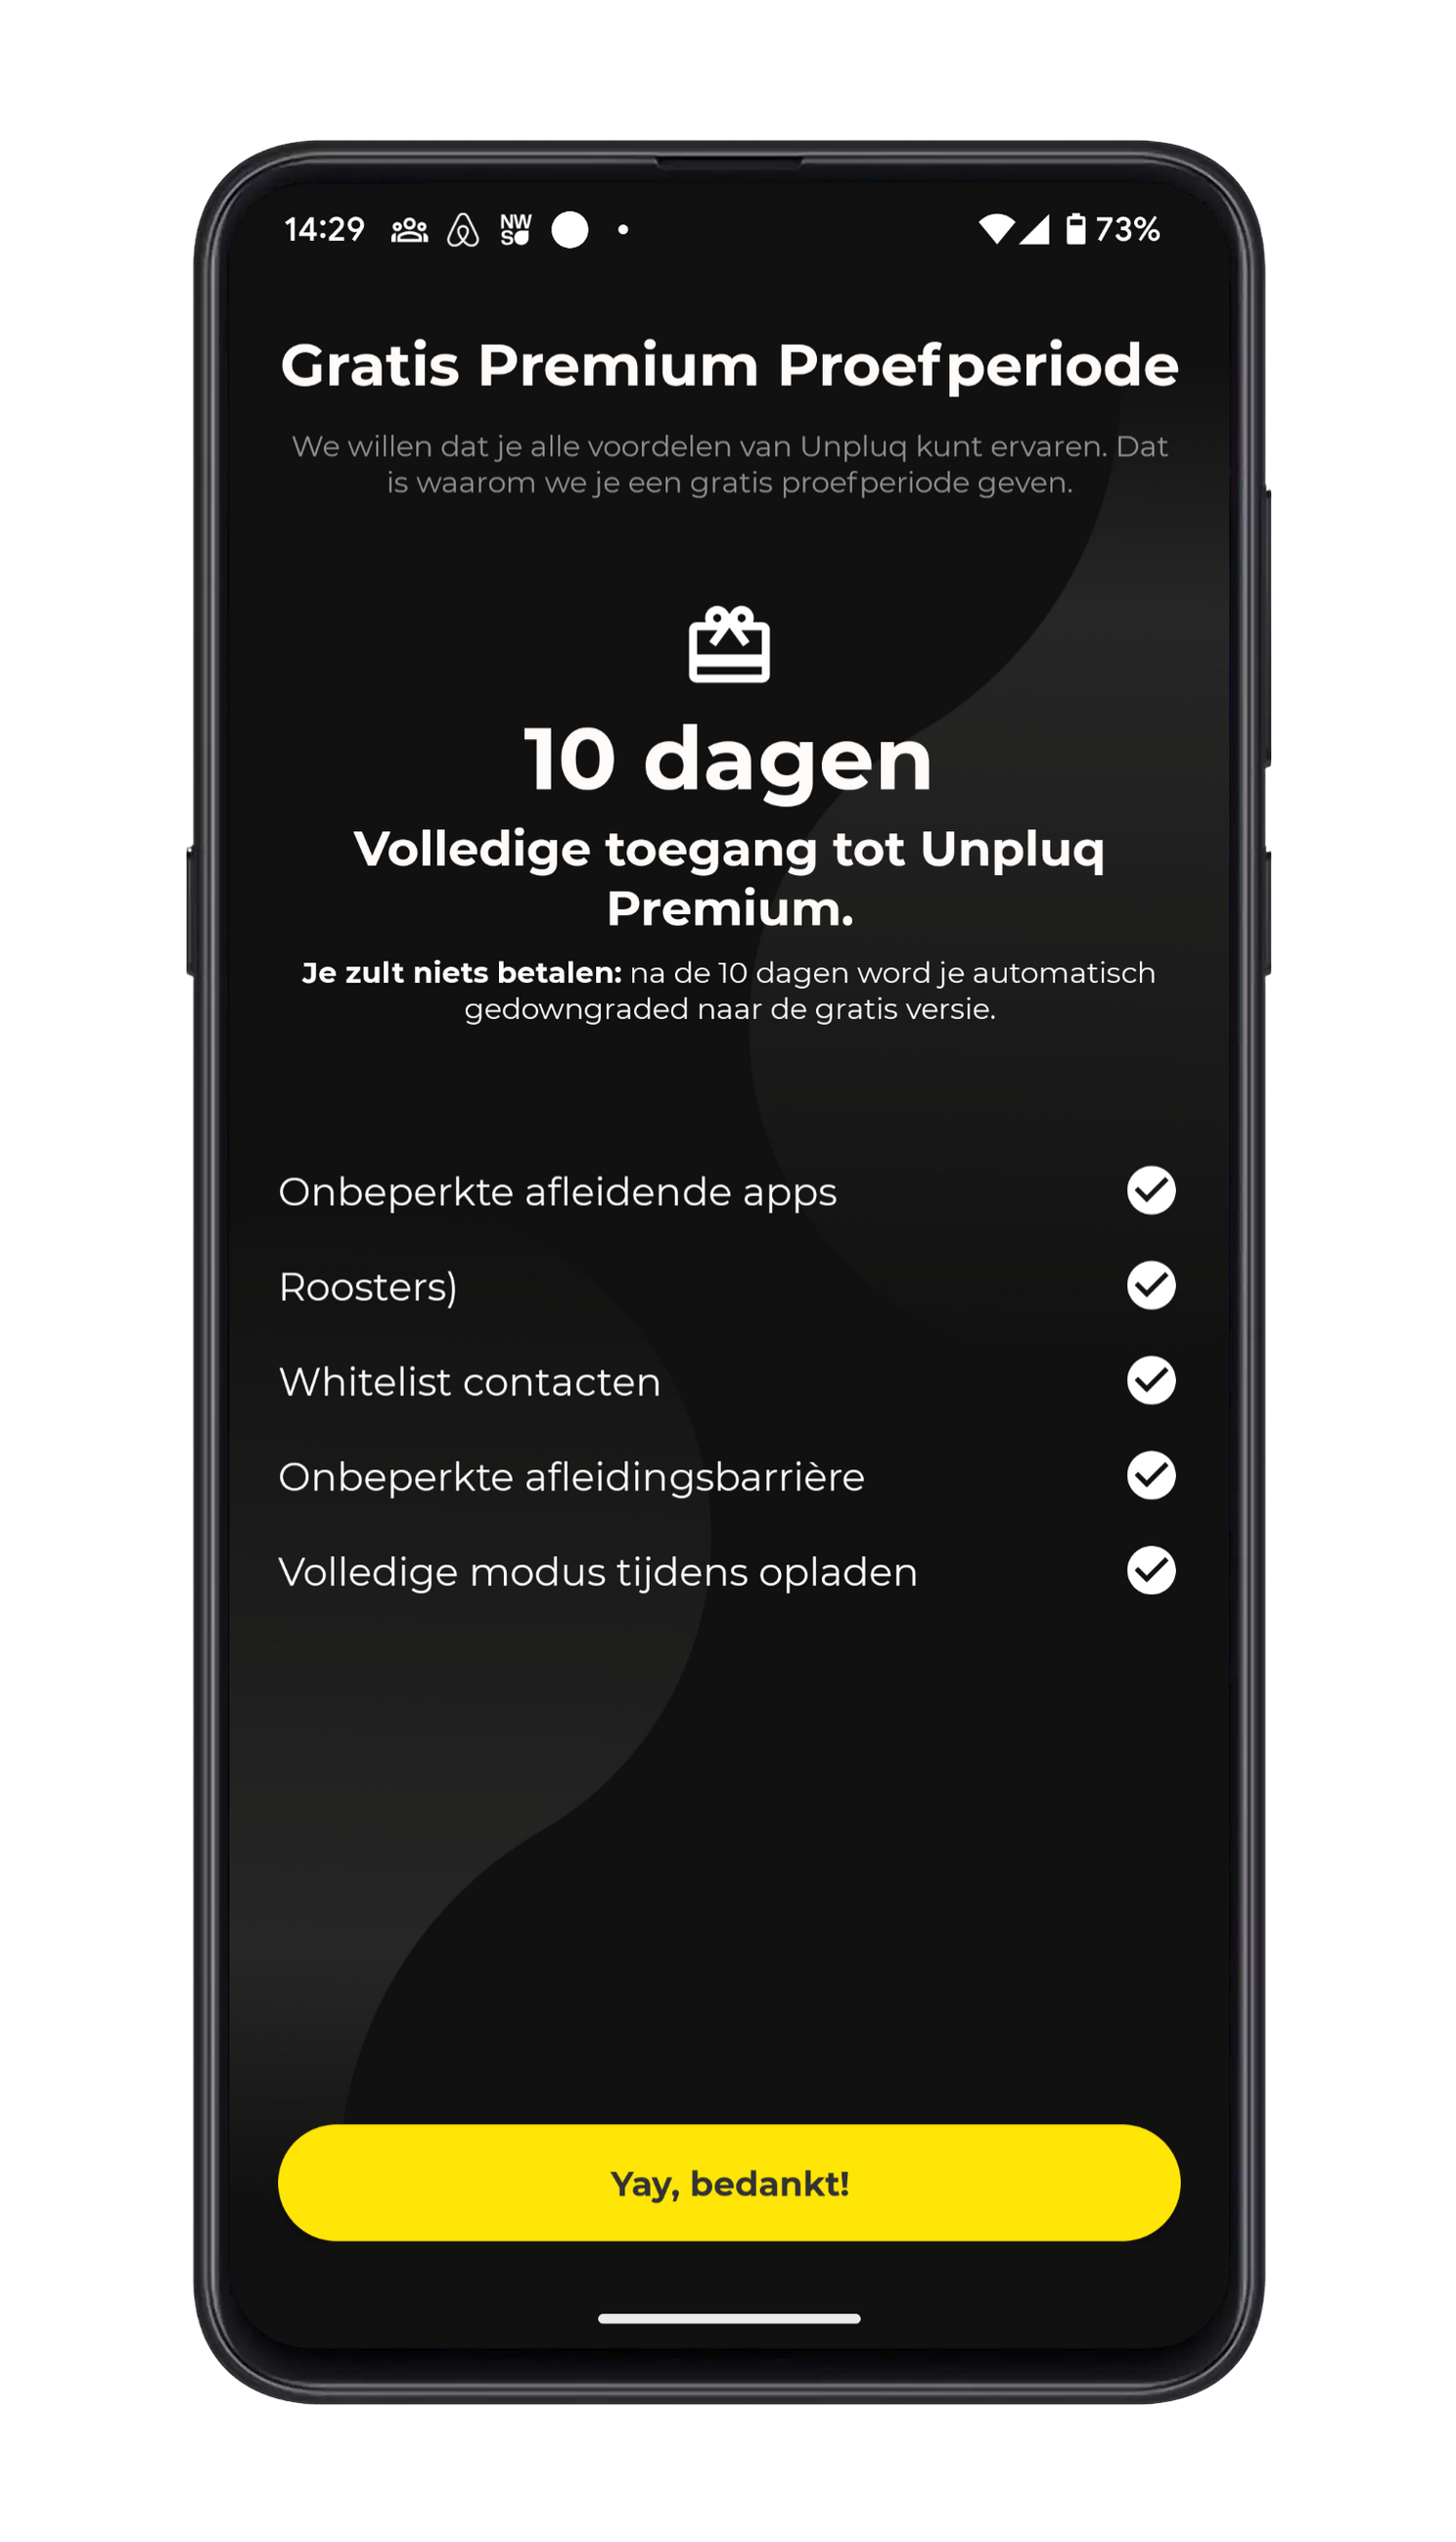 Dutch Unpluq Tag helps avoid distraction: does it work?